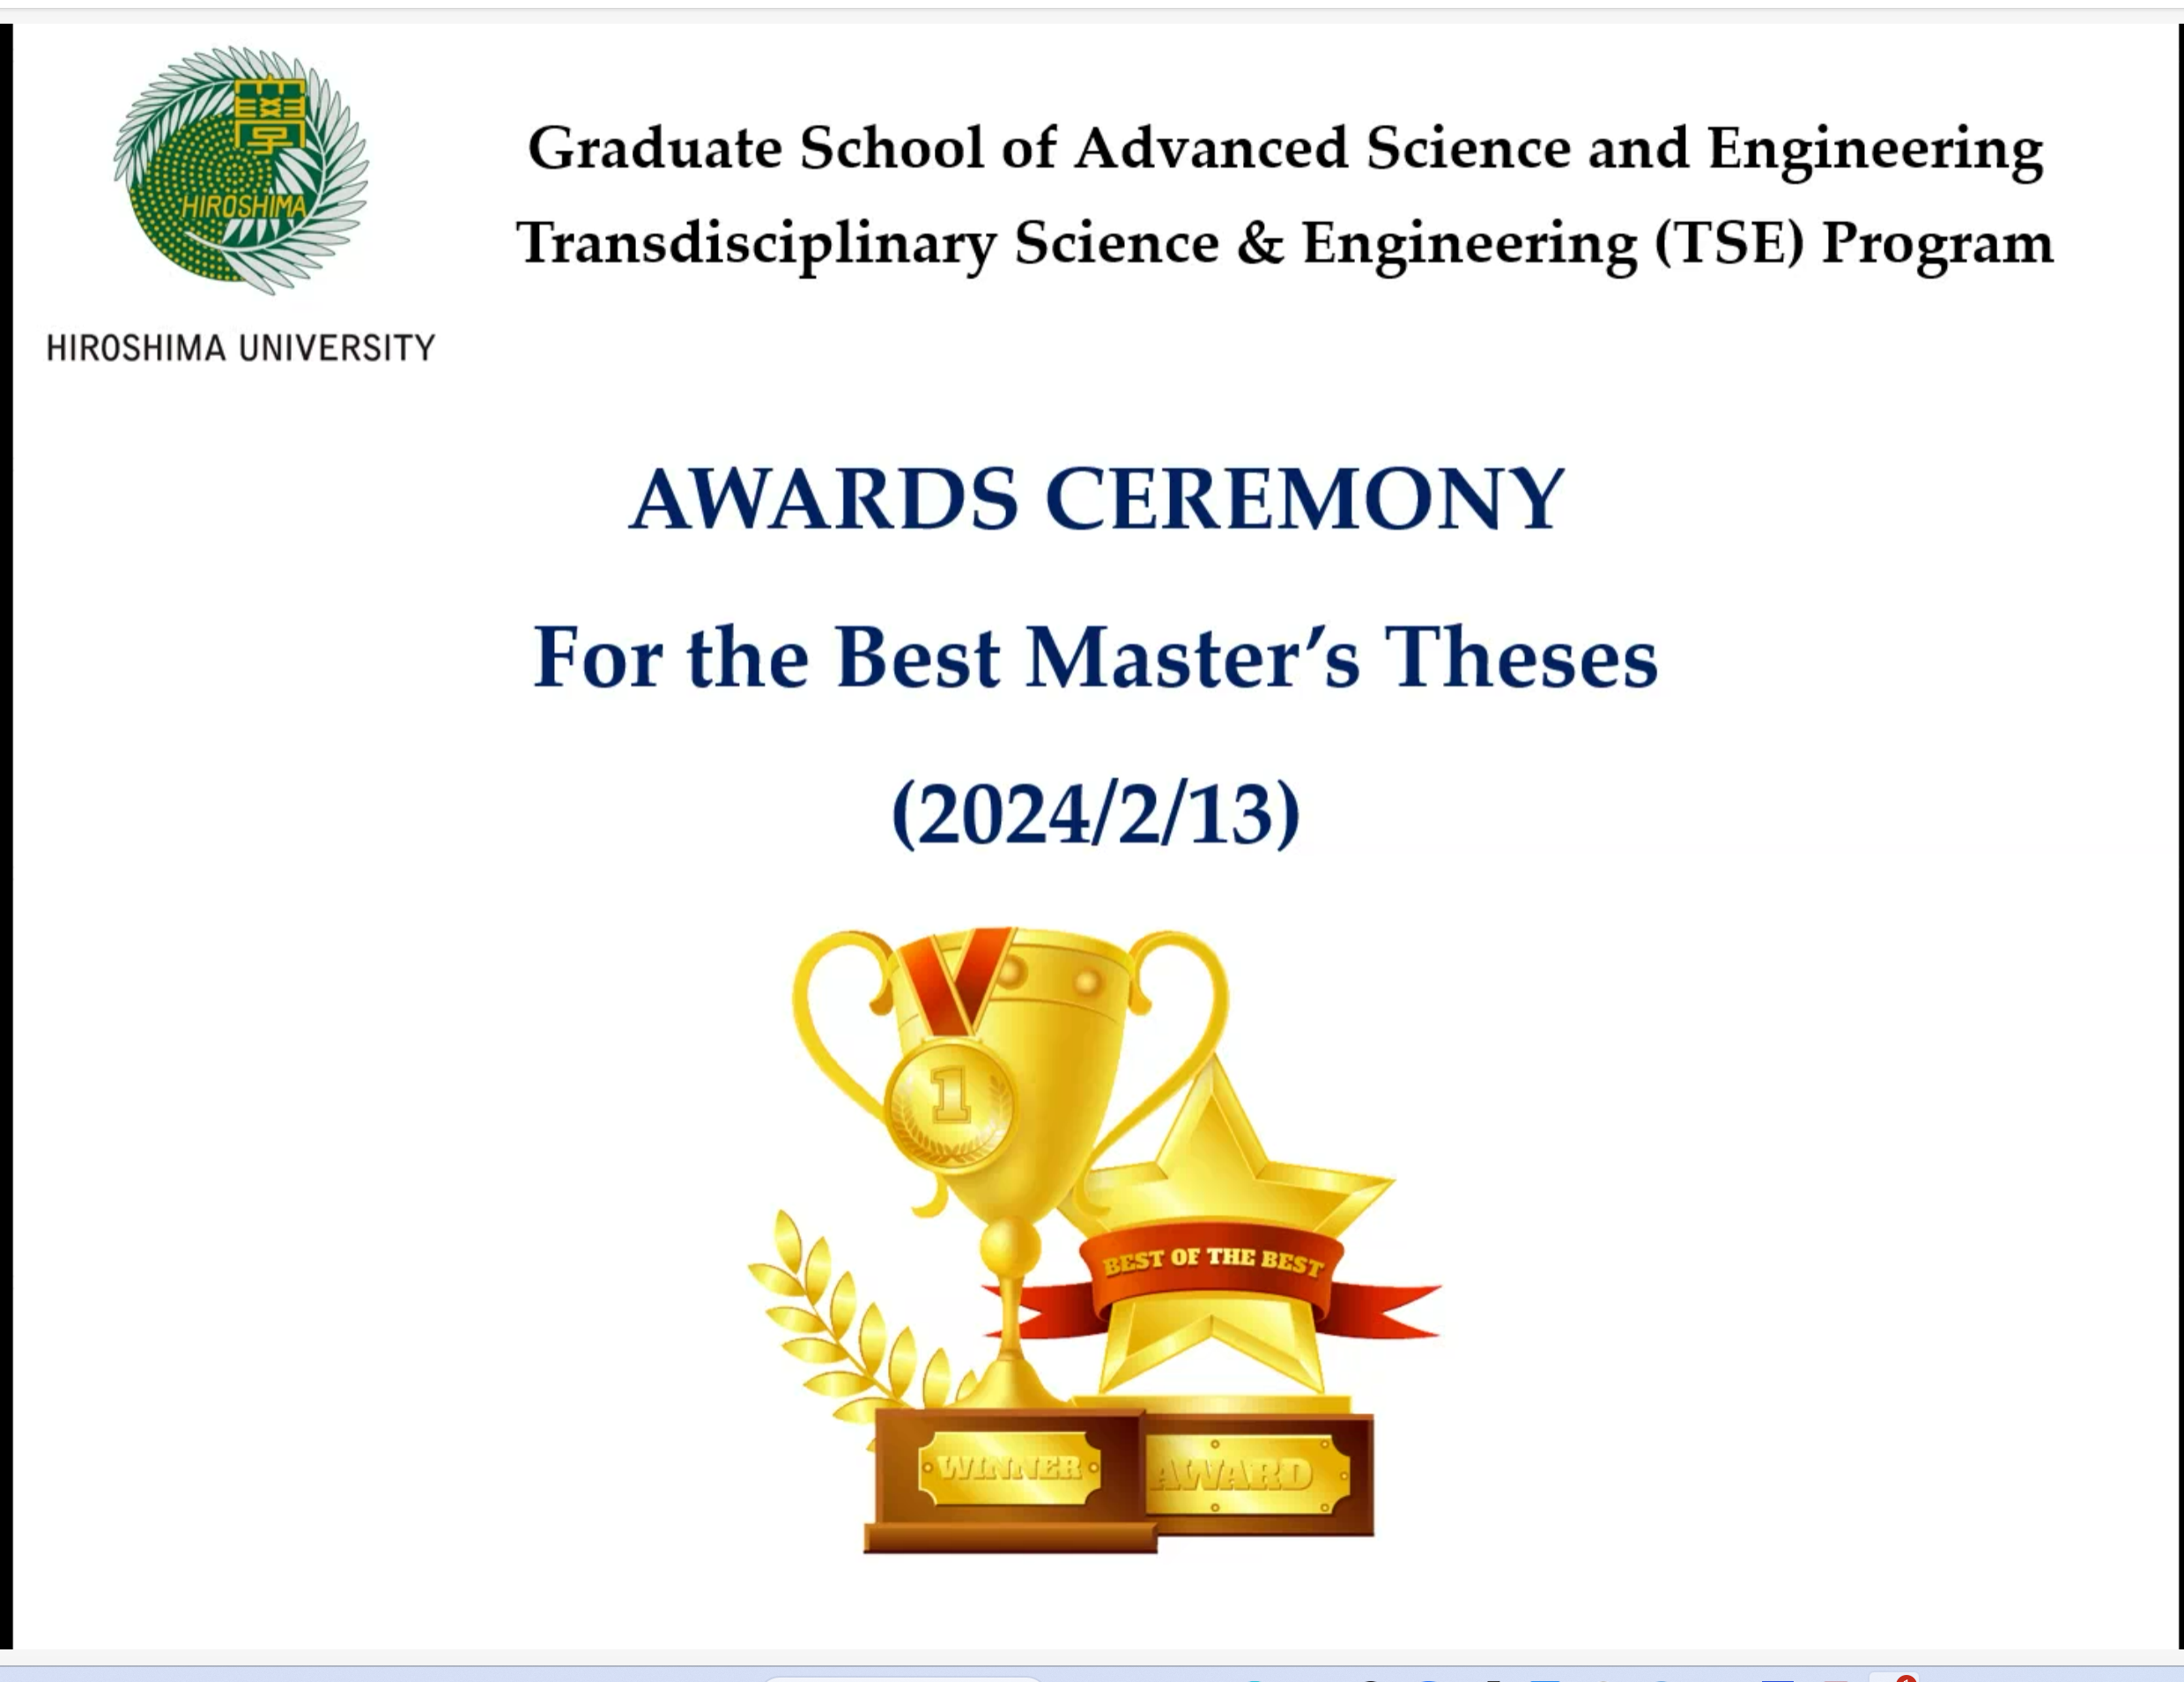 Best master thesis awards – Feb. 2024